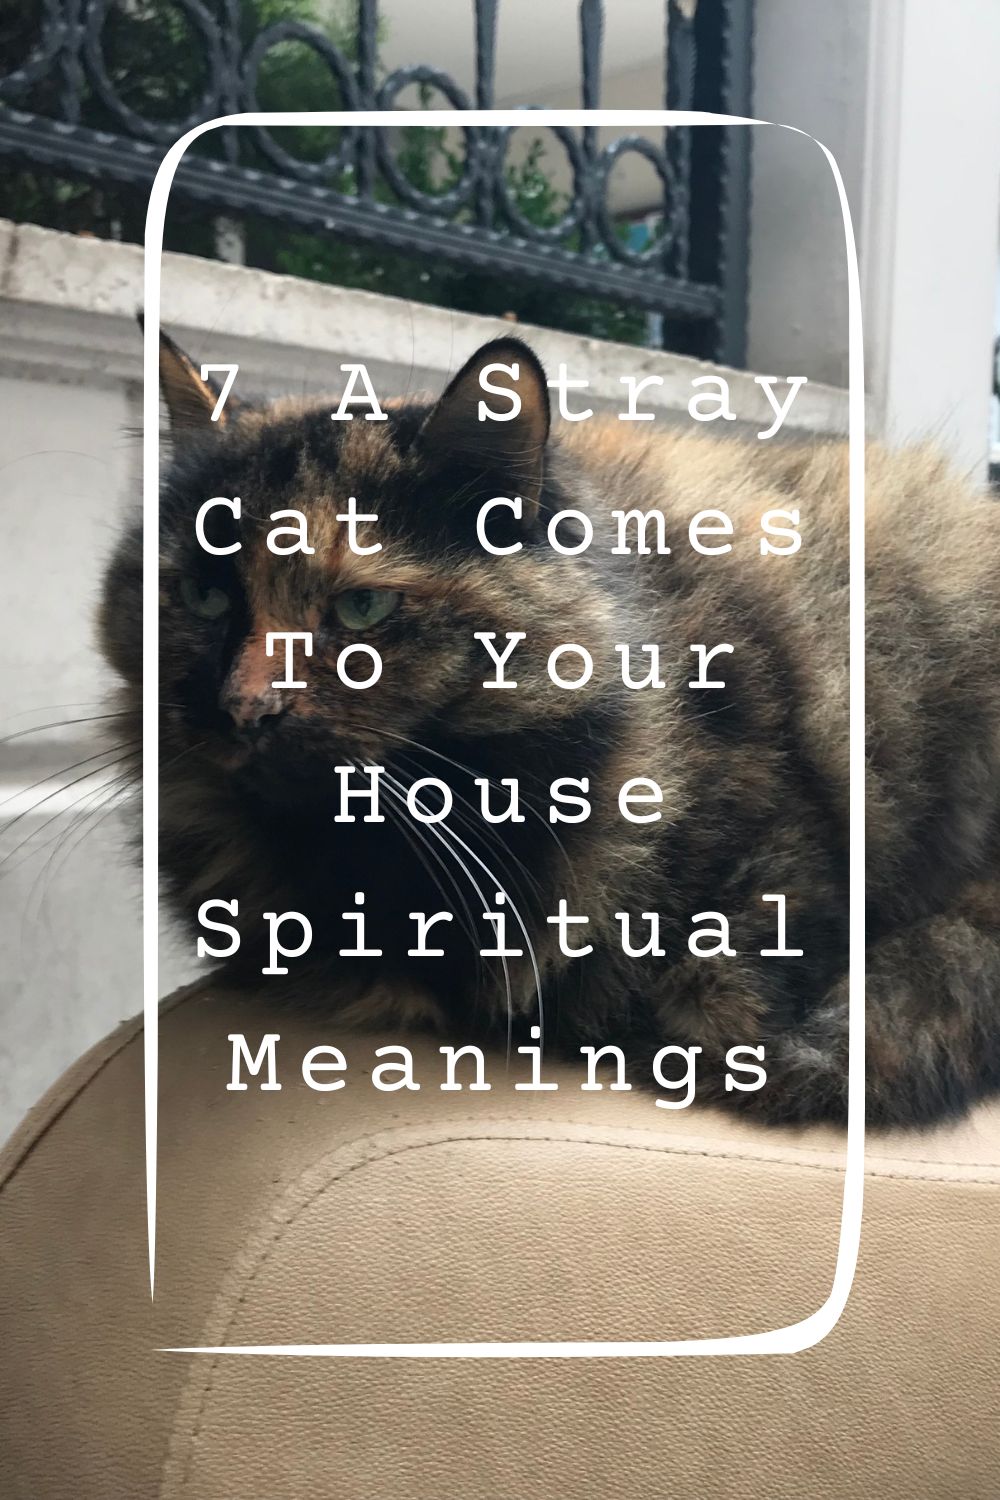 7 A Stray Cat Comes To Your House Spiritual Meanings 4